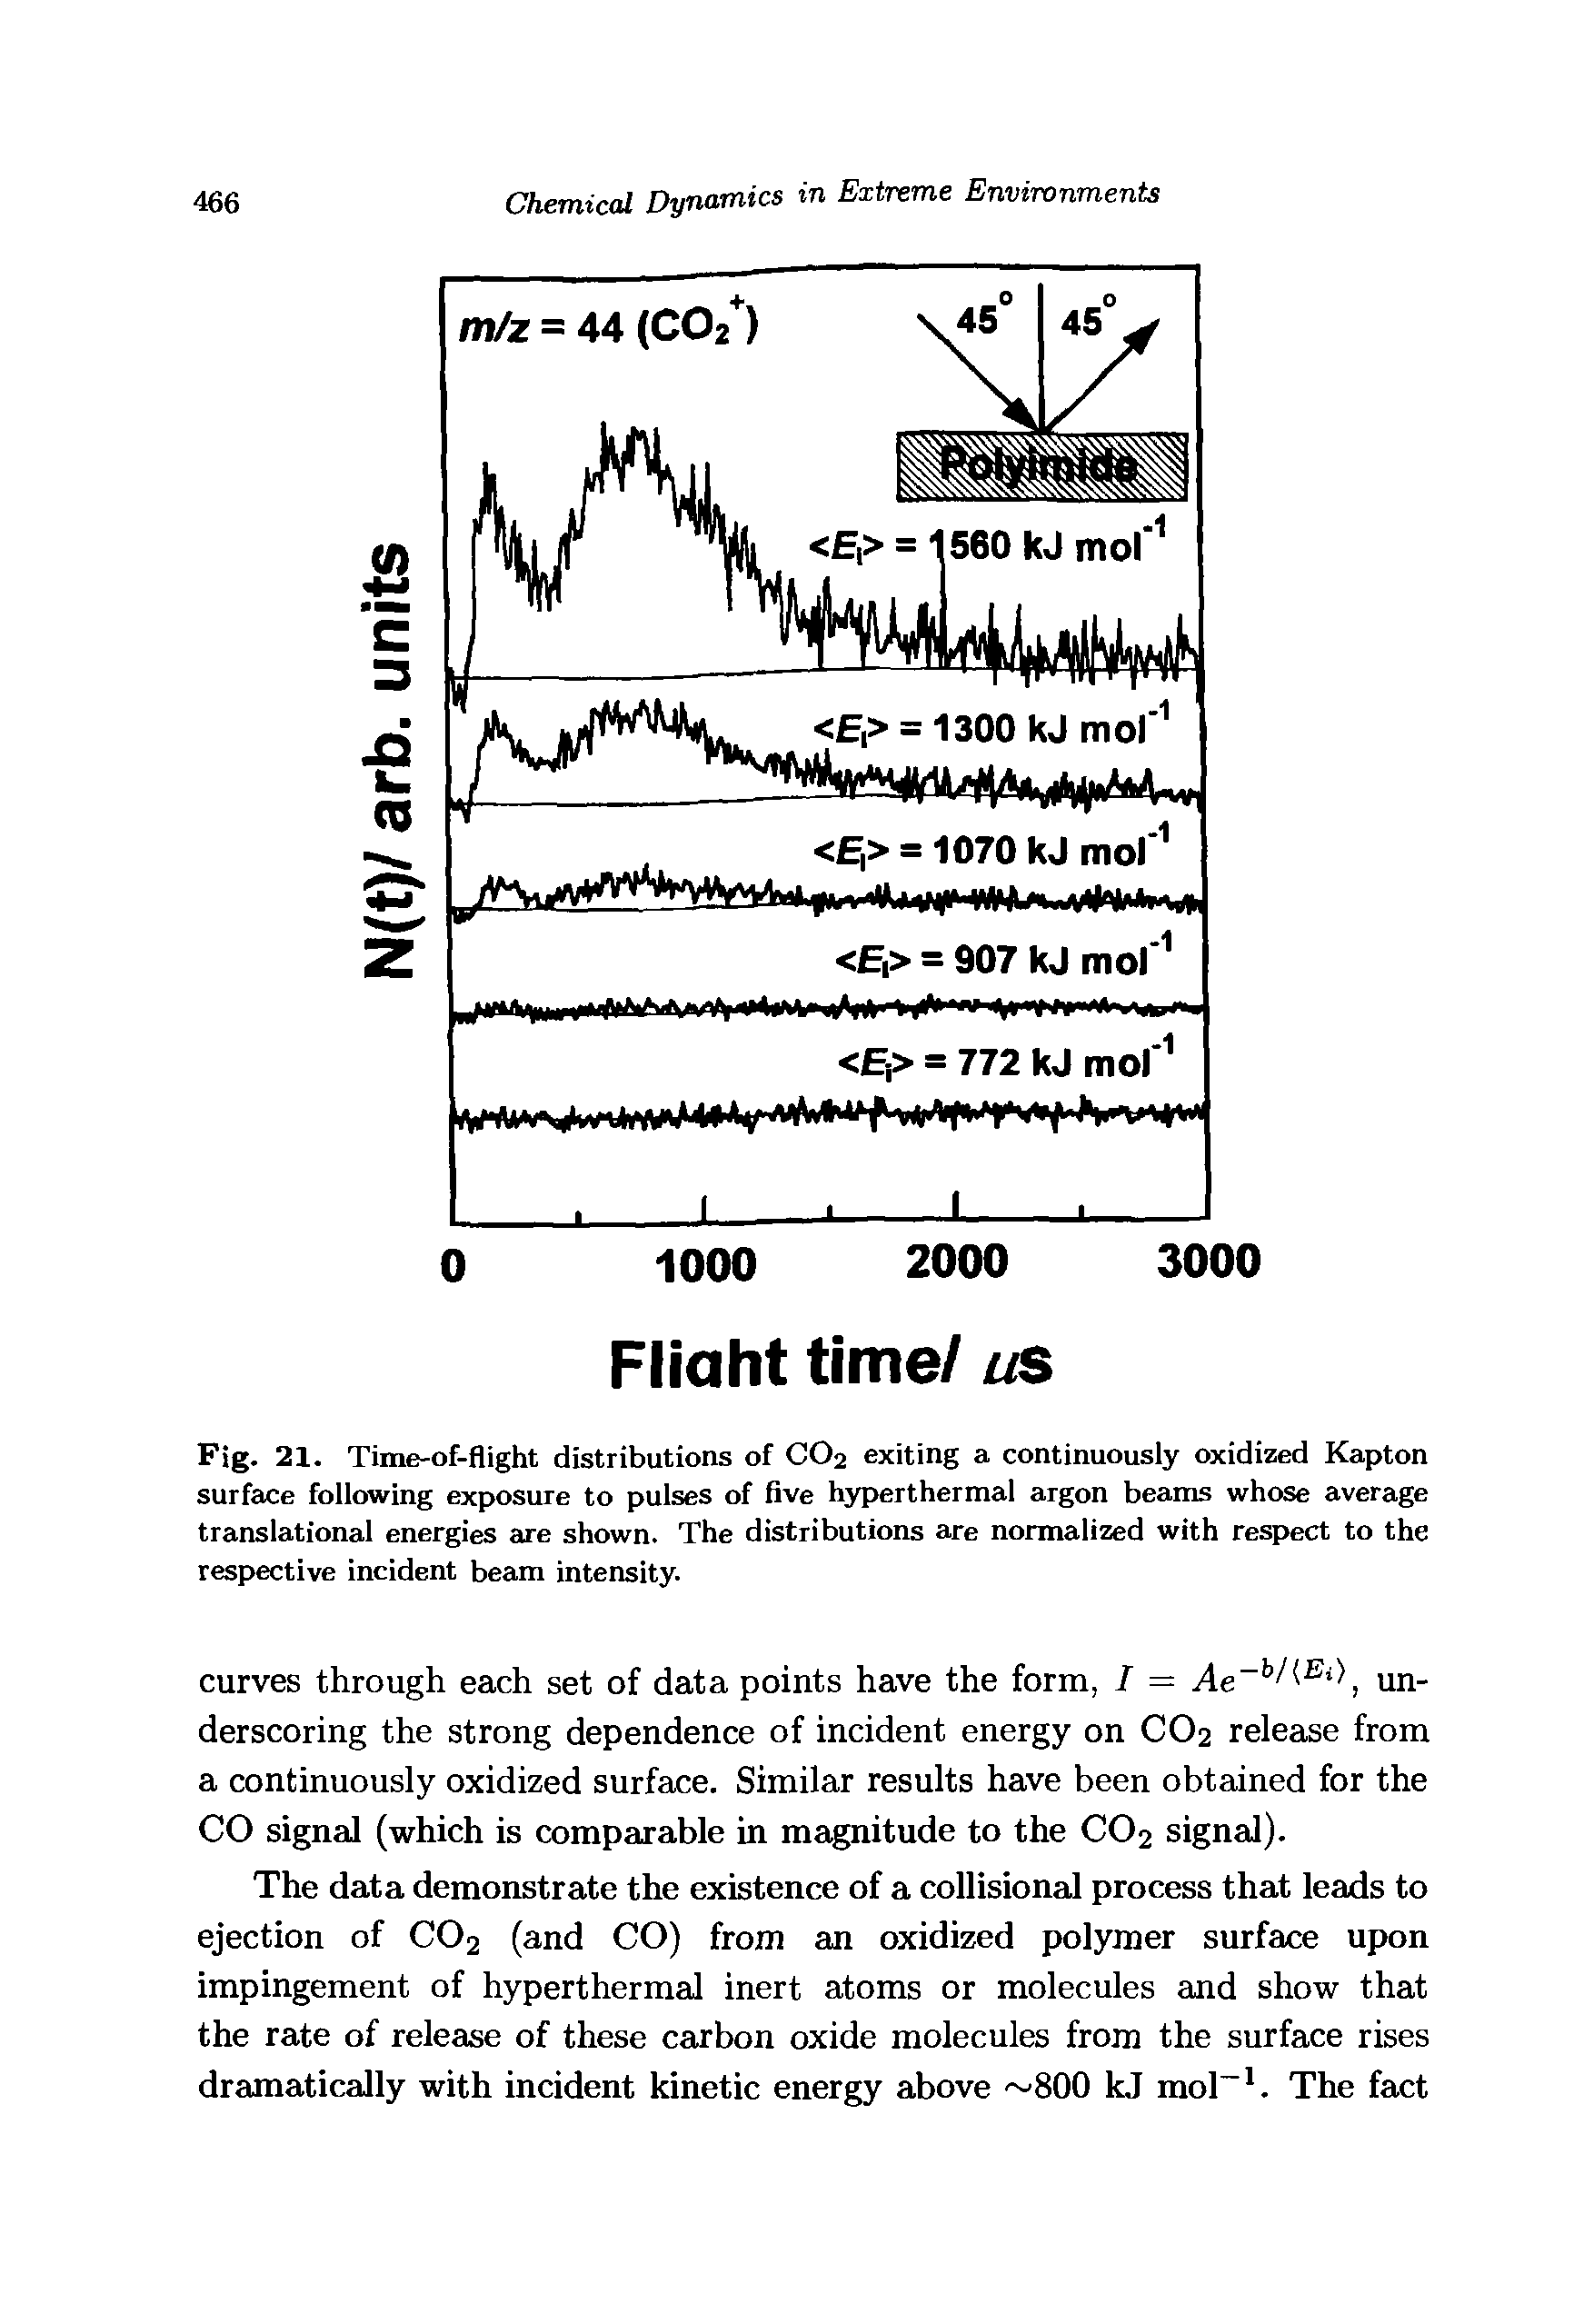 Fig. 21. Time-of-flight distributions of CO2 exiting a continuously oxidized Kapton surface following exposure to pulses of five hyperthermal argon beams whose average translational energies aie shown. The distributions are normalized with respect to the respective incident beam intensity.